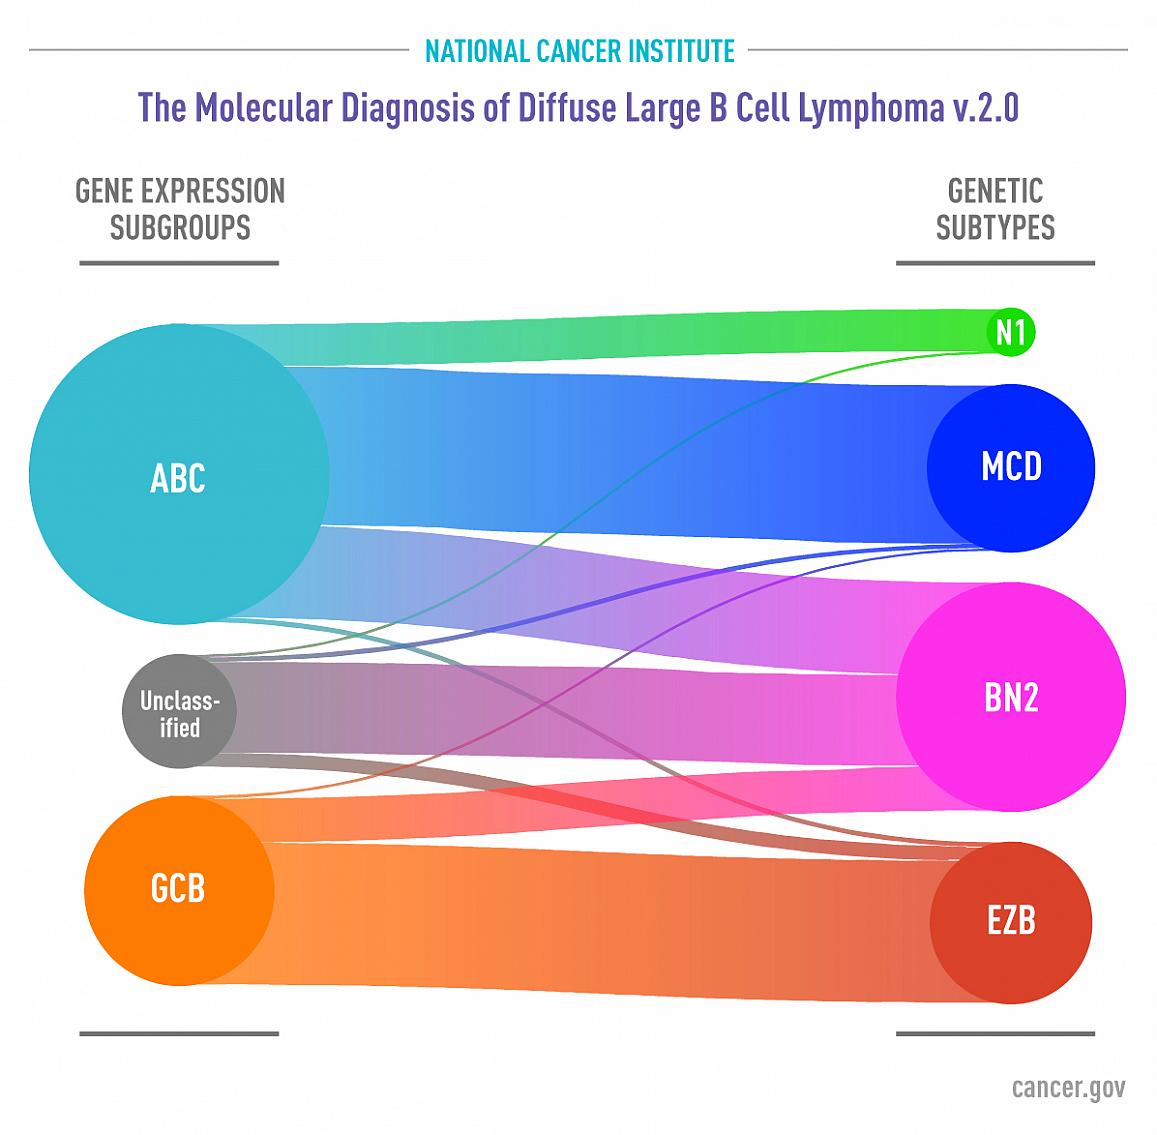 Diagram showing relationships between gene expression subgroups and genetic subtypes of diffuse large B-cell lymphoma (DLBCL)